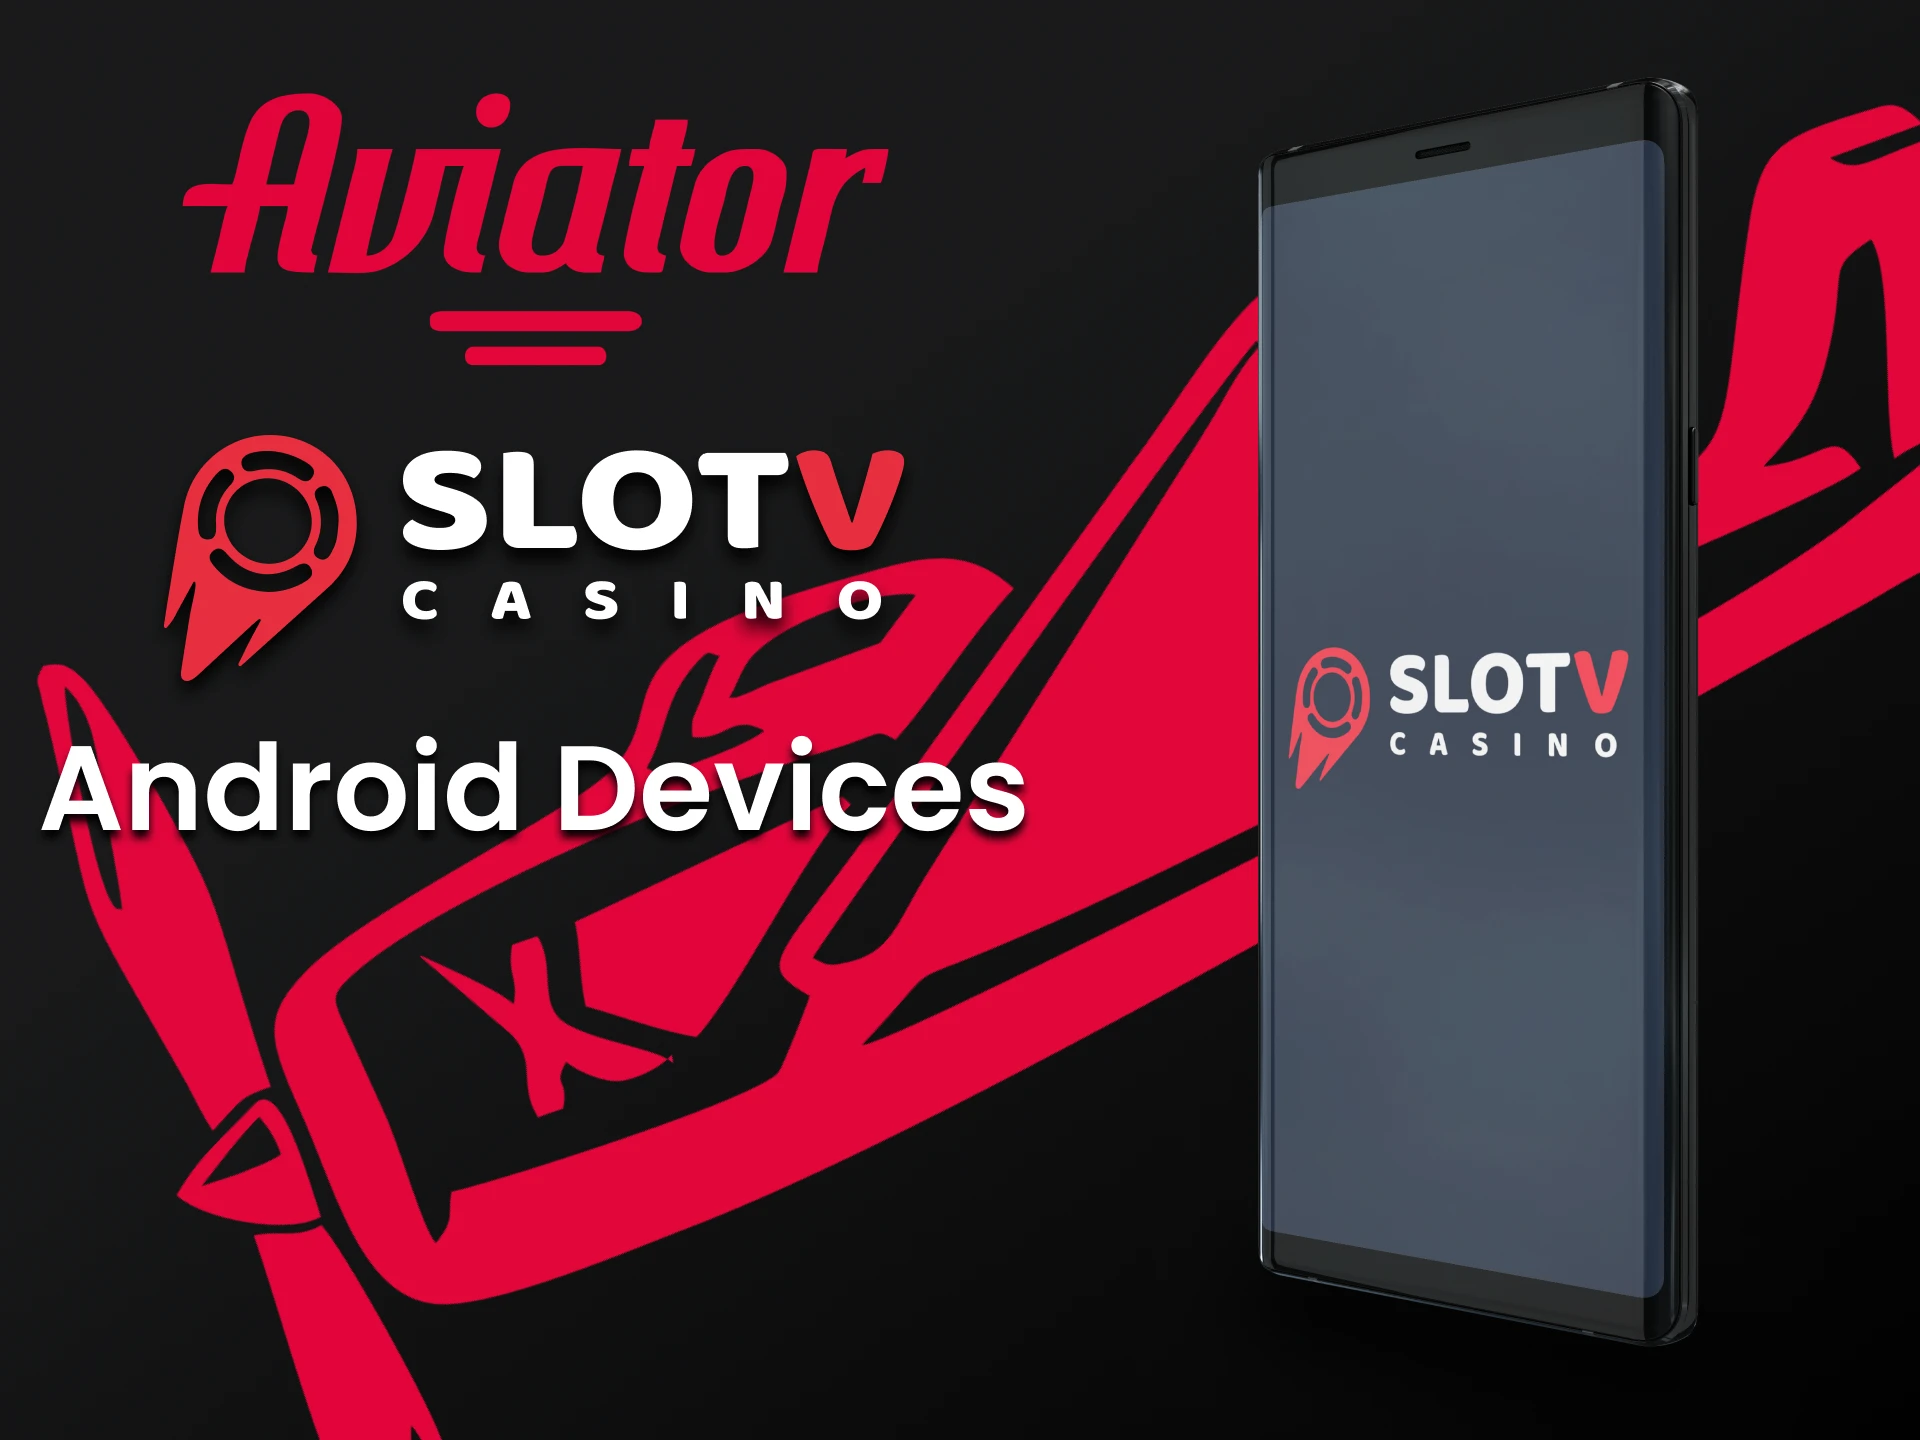 Download the SlotV Android app to play Aviator.